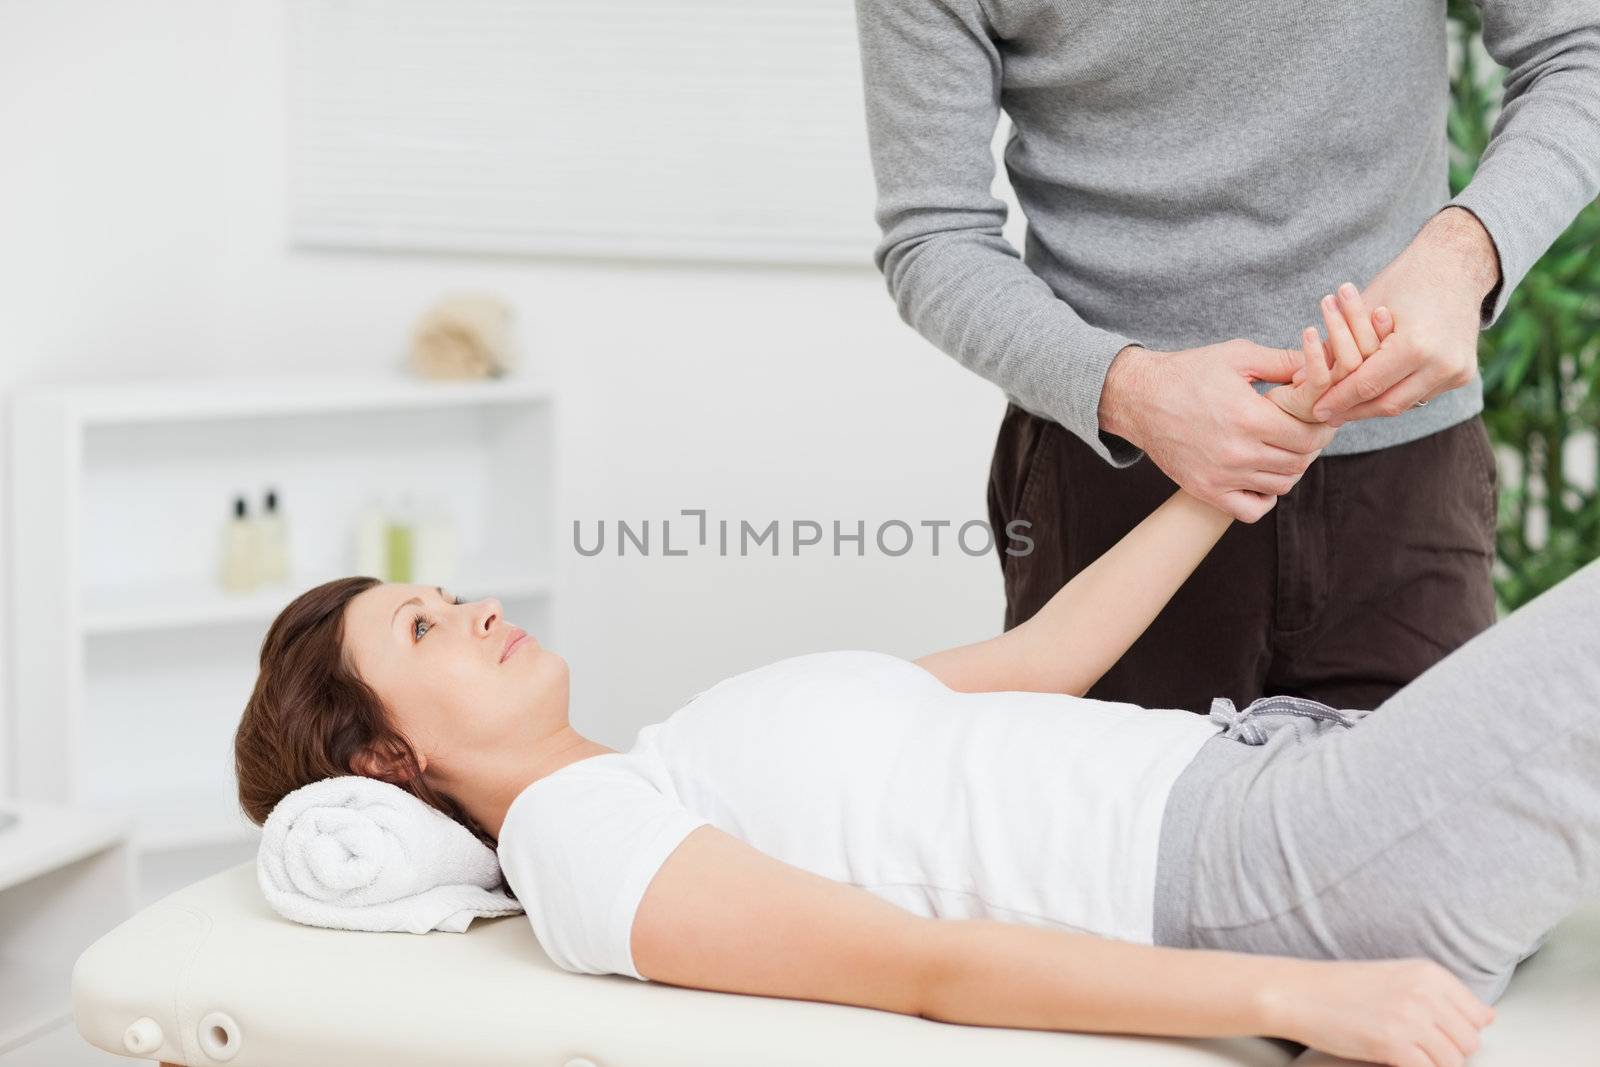 Physiotherapist massaging the hand of a woman by Wavebreakmedia